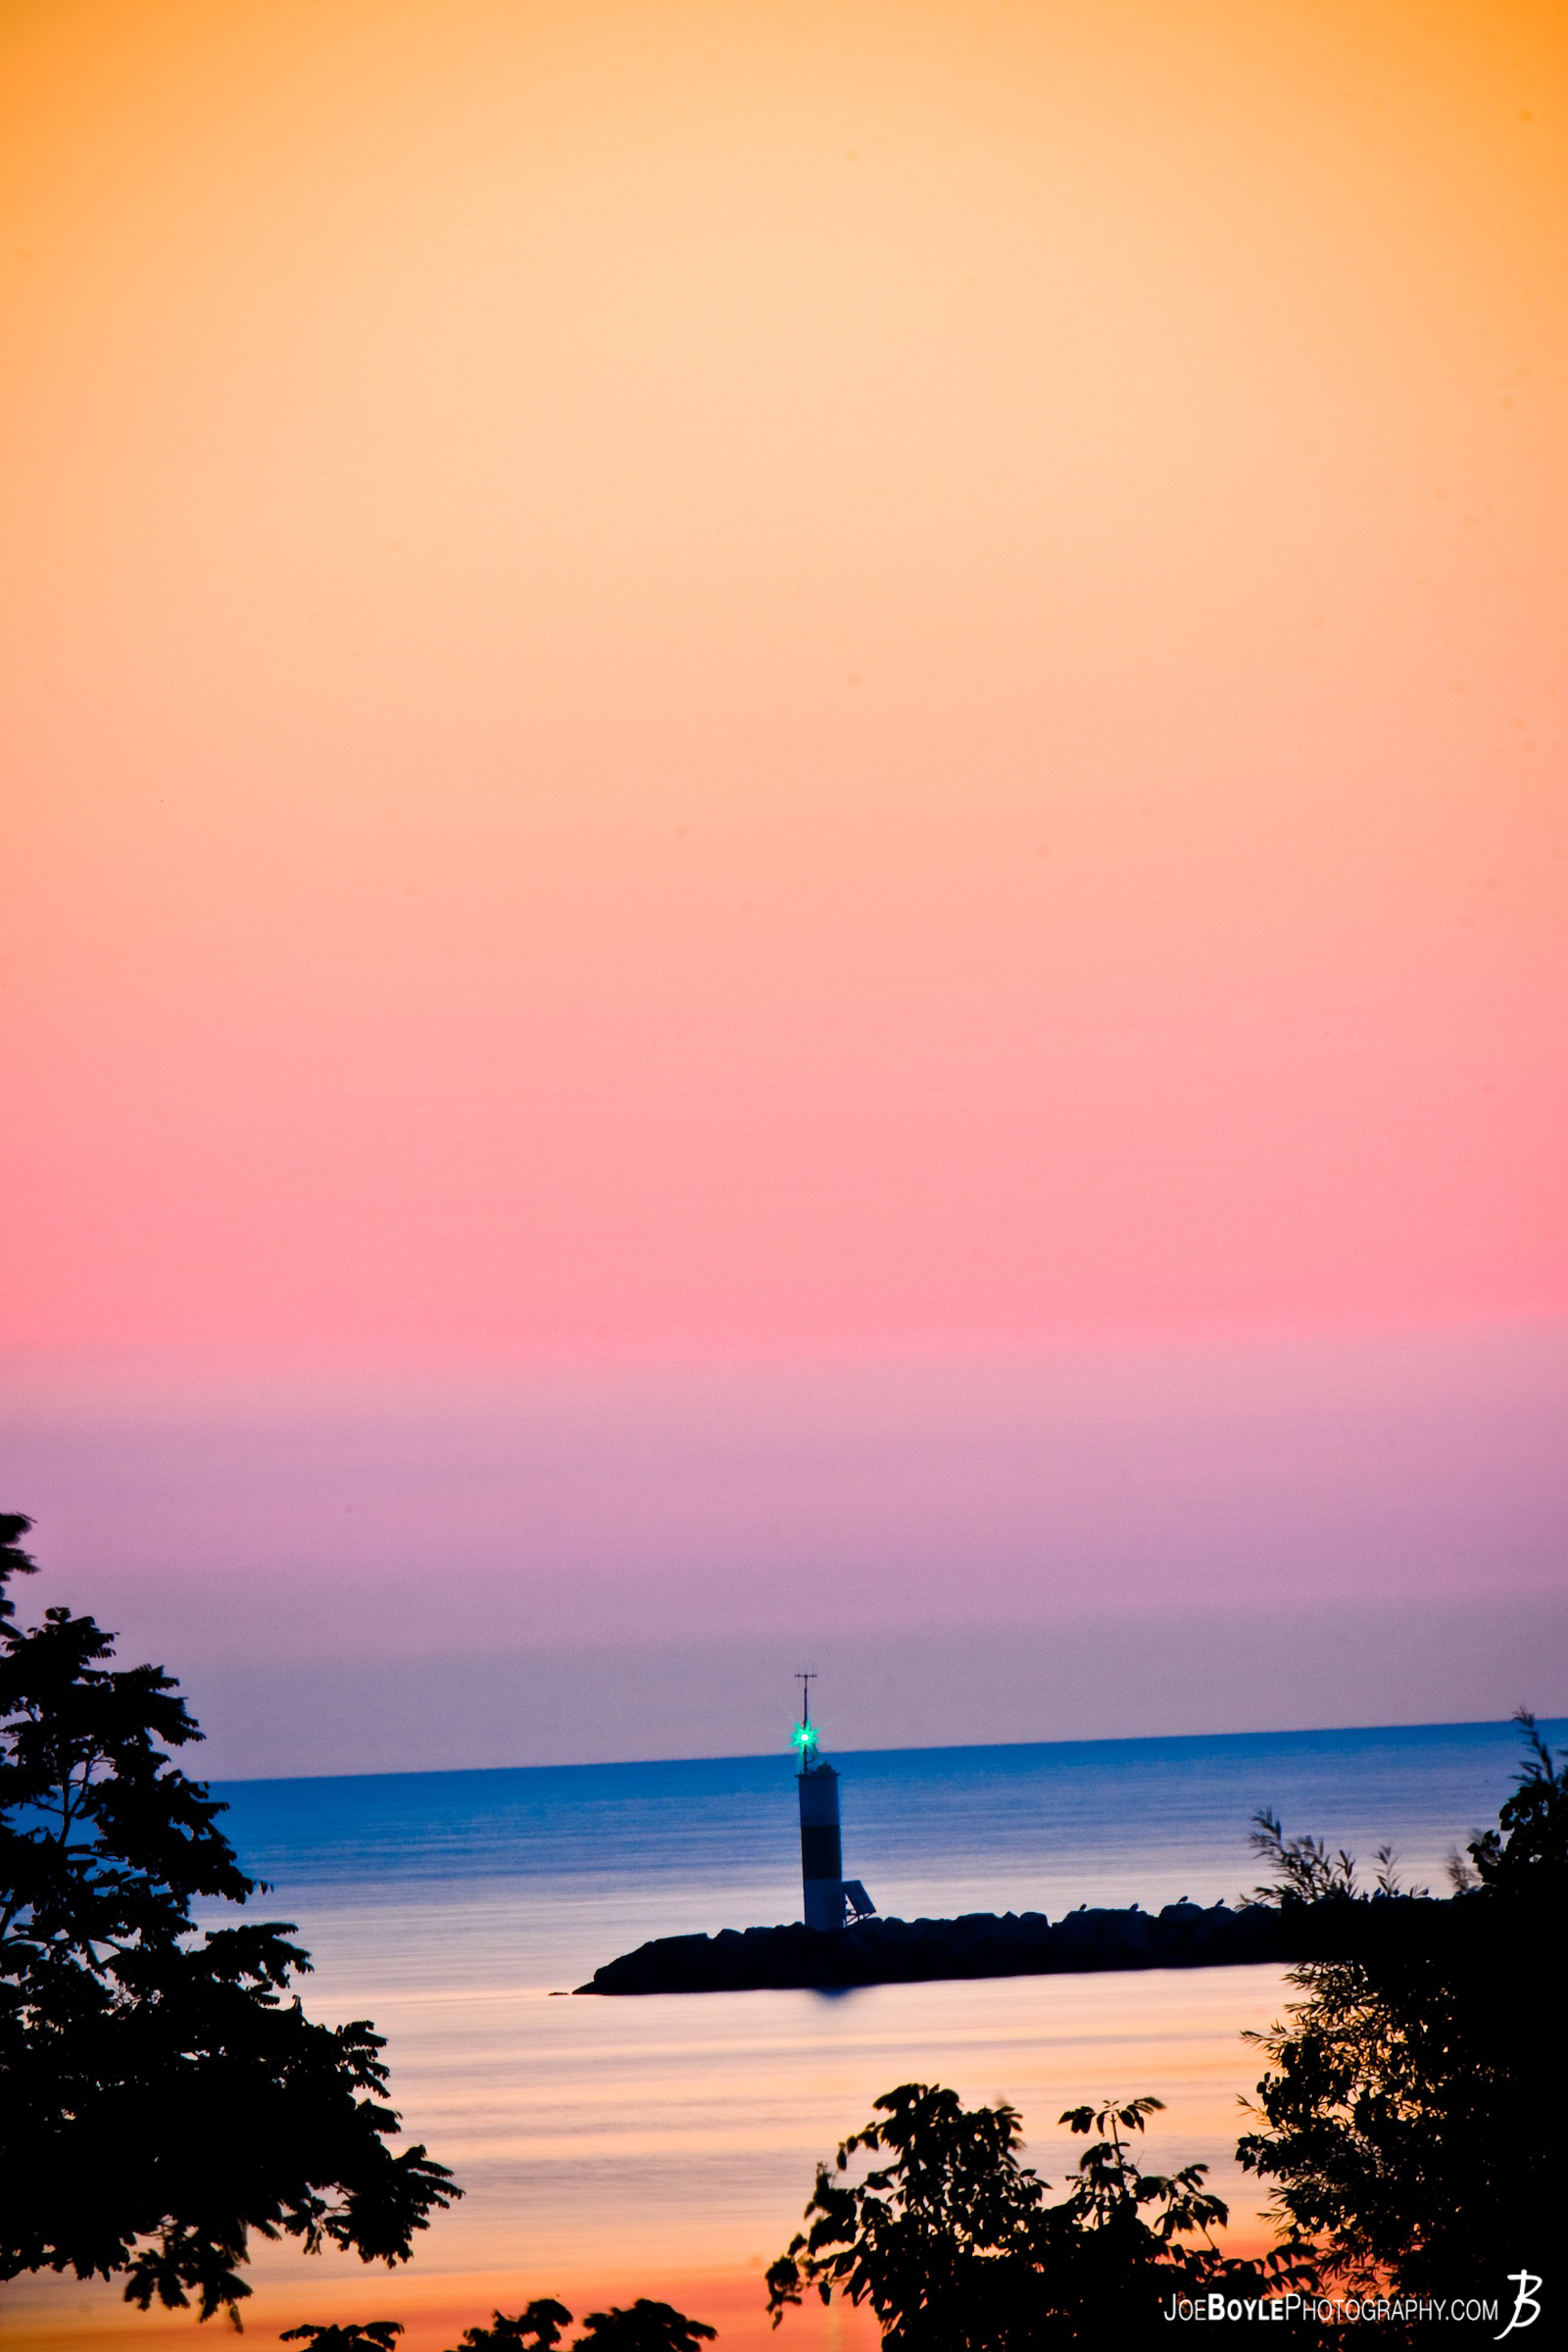  This picture was taken near Cleveland Ohio and features the Lighthouse for the Cleveland Yacht Club. Captured early in the morning, the colors that were available are truly astounding! 